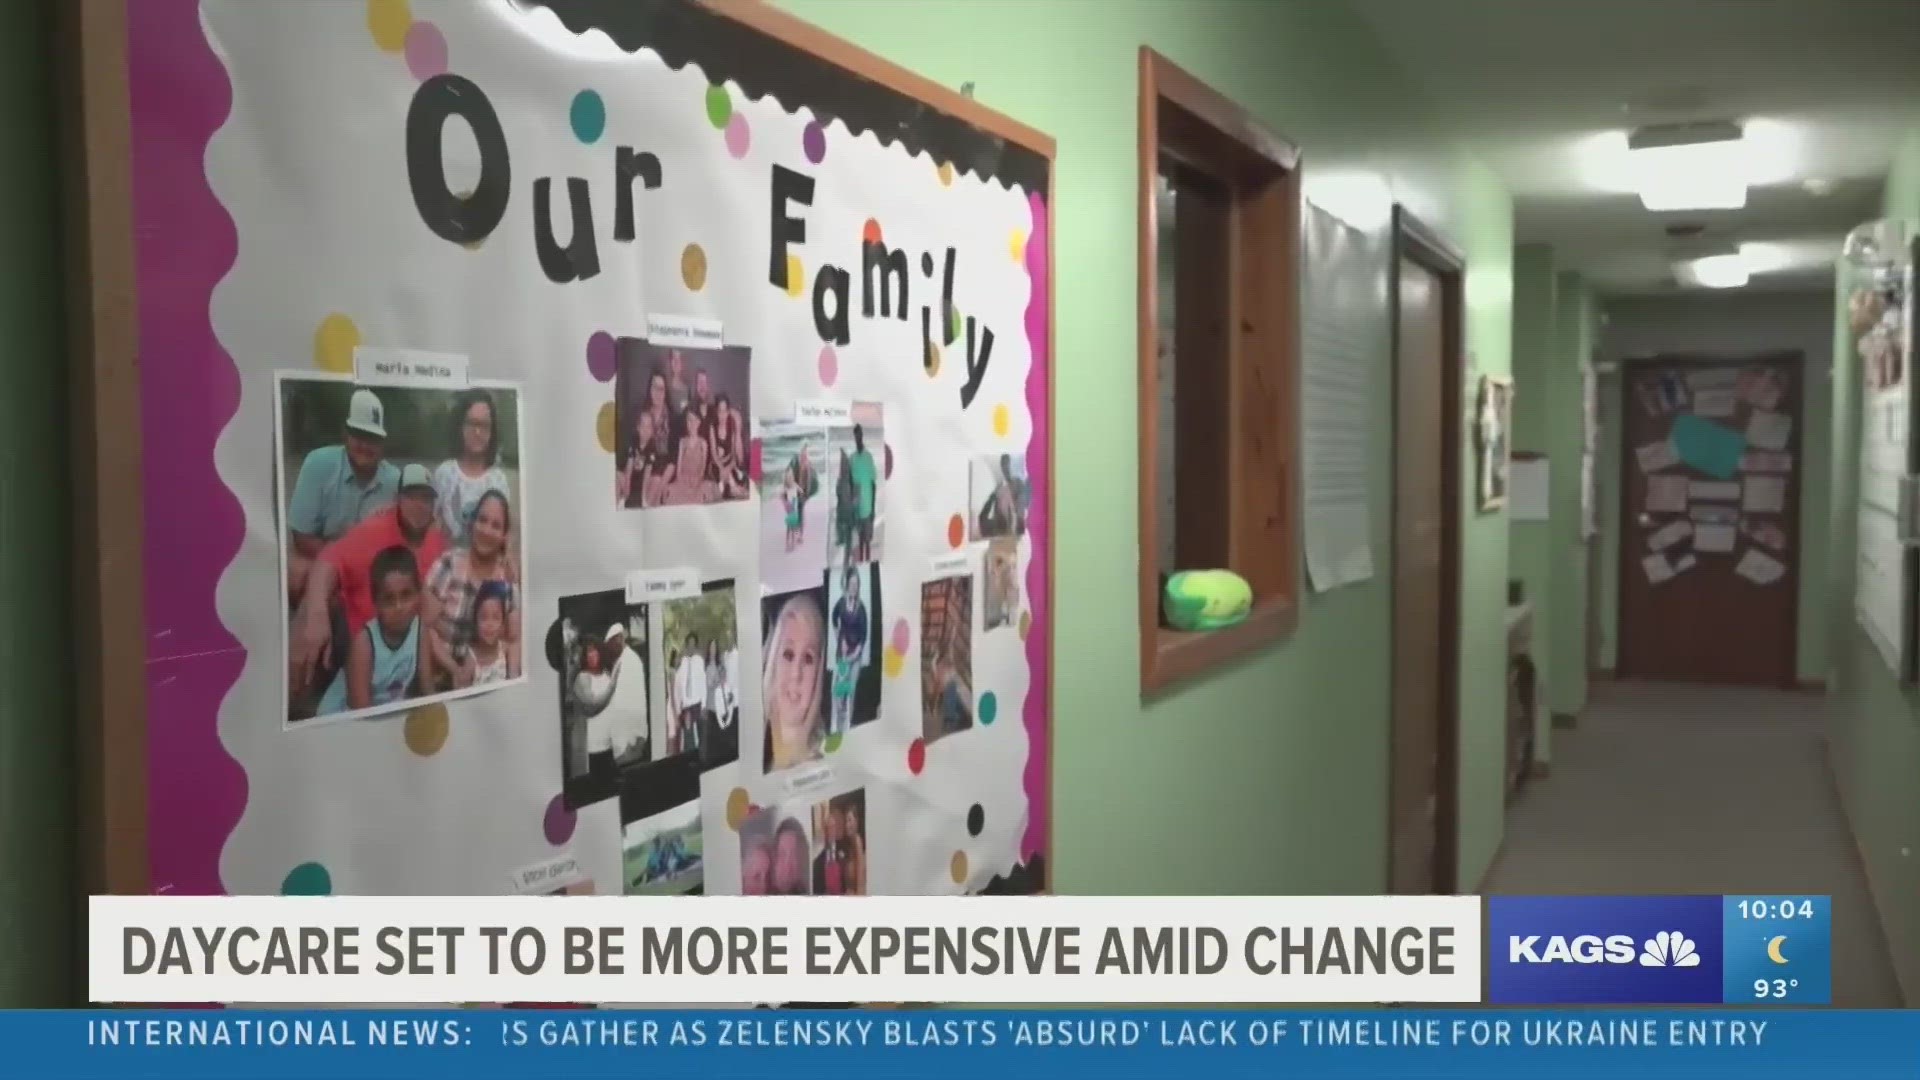 Beginning in October, daycare centers will be unable to provide services to families with CCMS or CCS. We talk with families who are frustrated about the change.